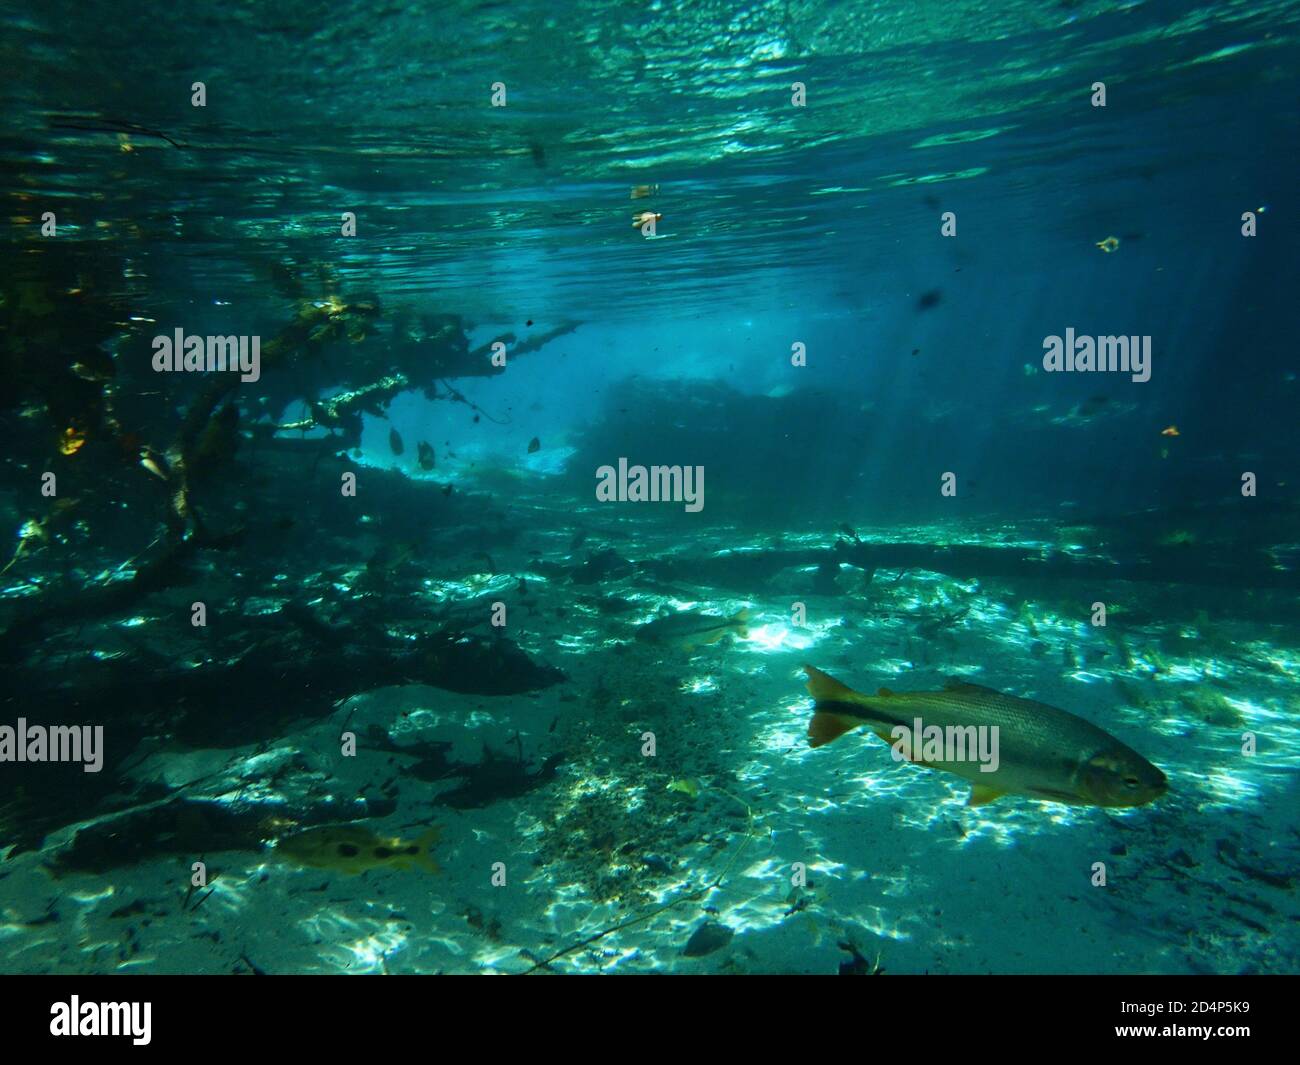 Huge Dourado swimming in the clear waters of Rio triste Stock Photo